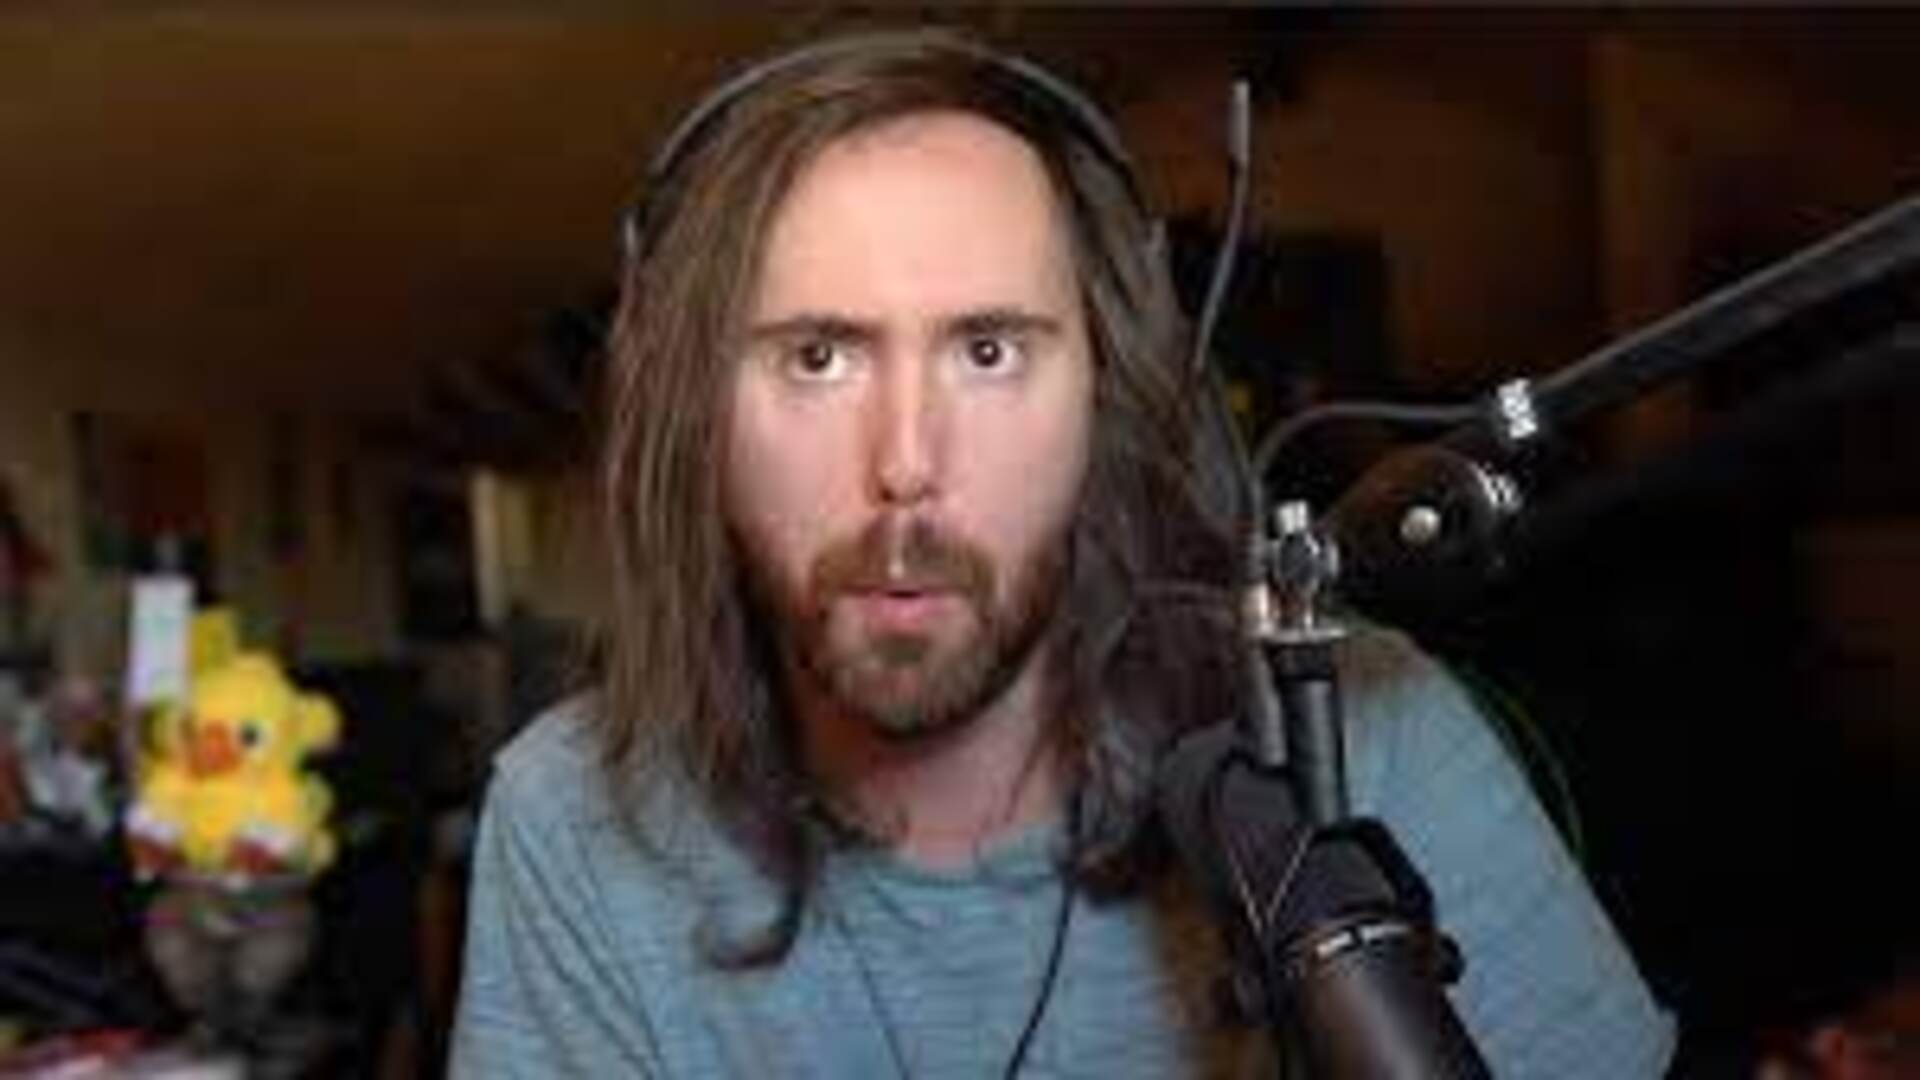 Twitch streamer, Asmongold